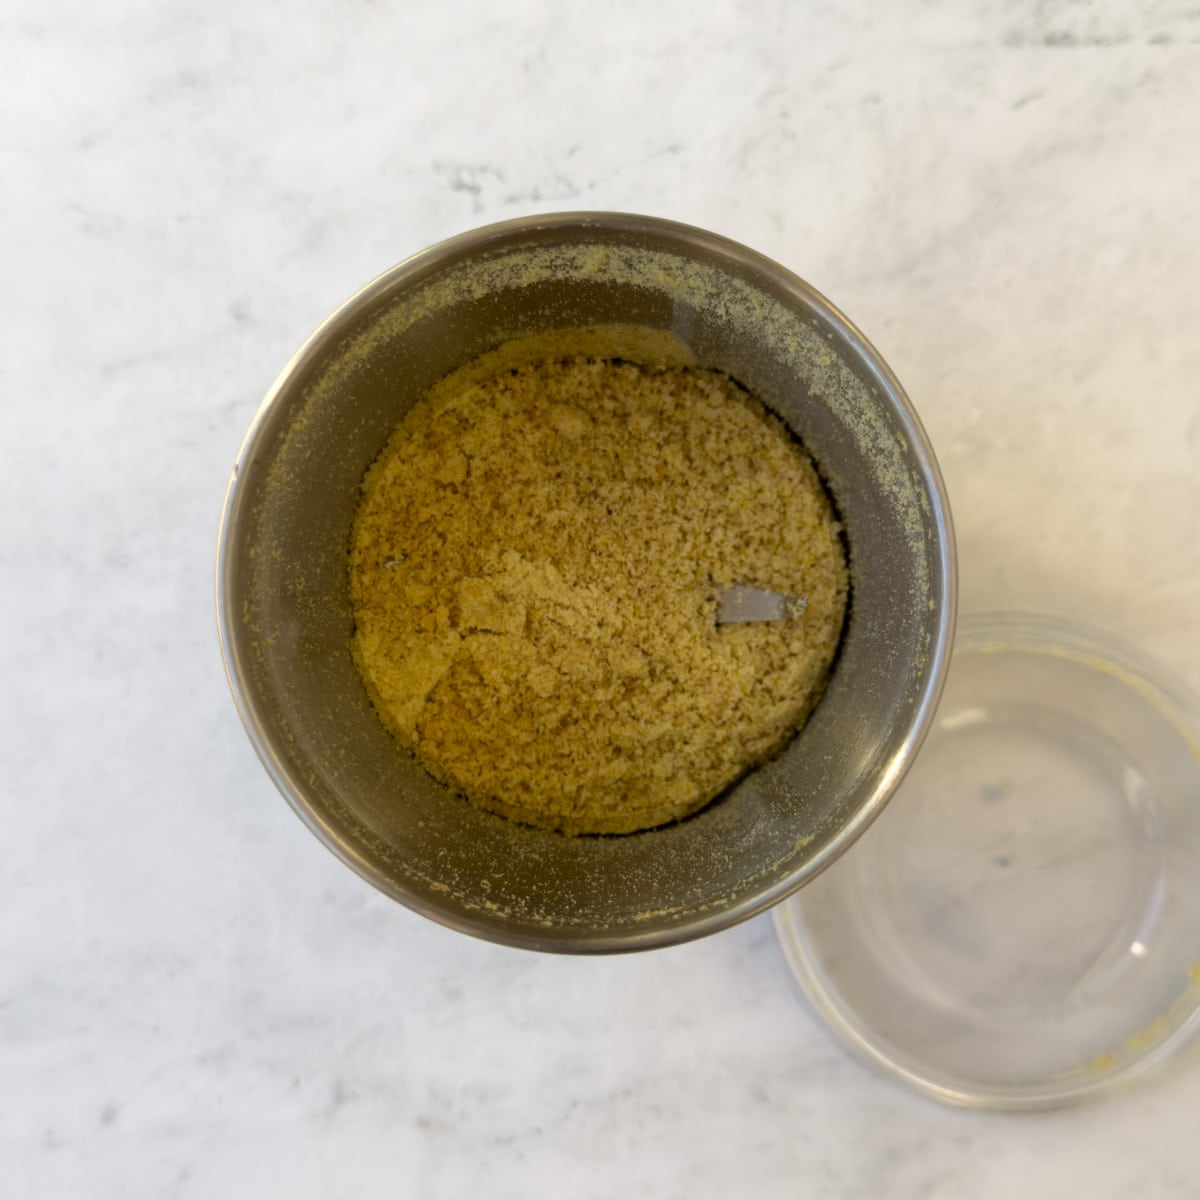 Golden ground flaxseed in a small hand-held grinder container.